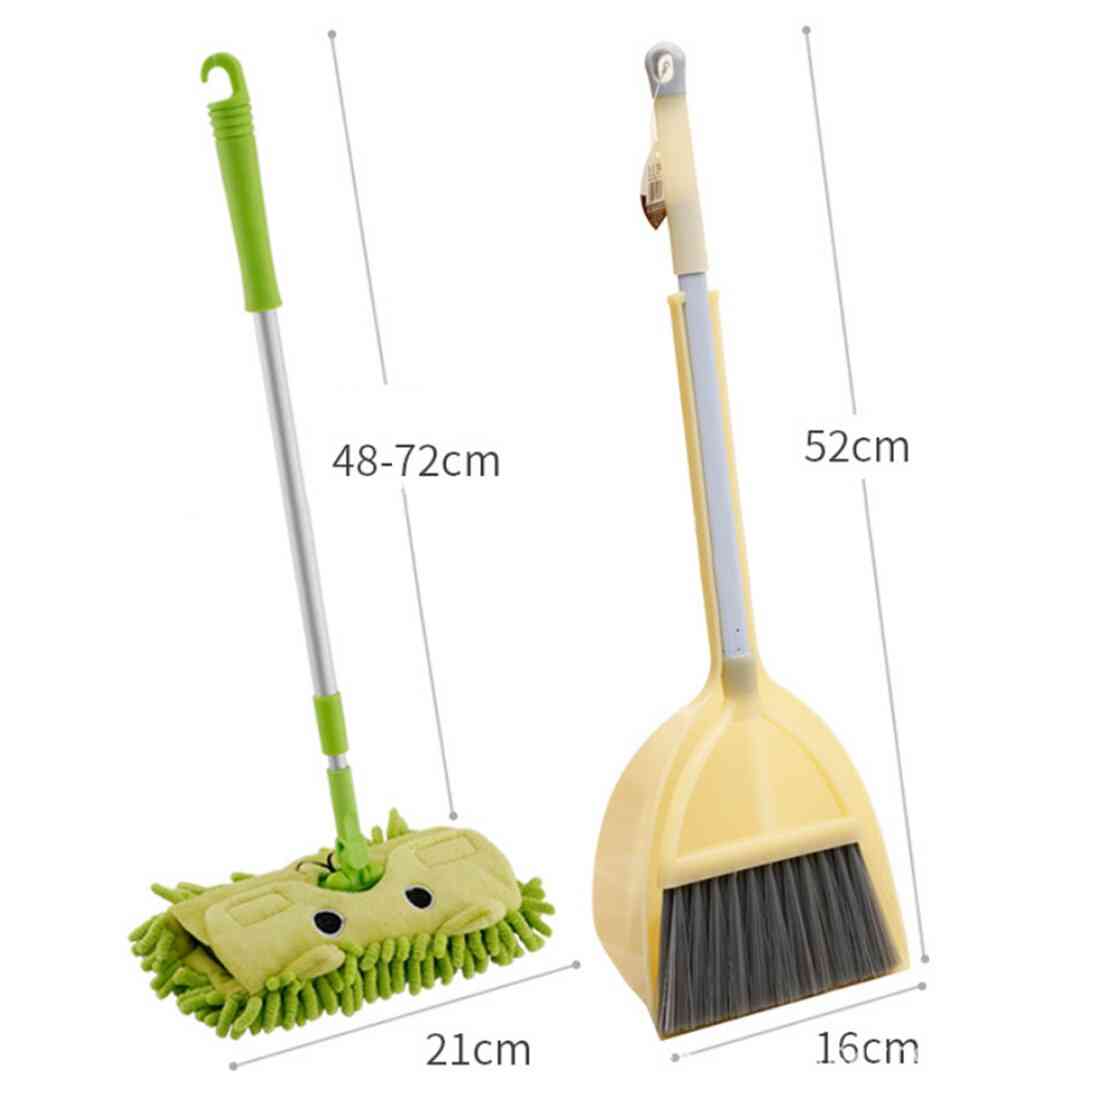 Pretend Play Housekeeping Cleaning Tools Kit With Mop